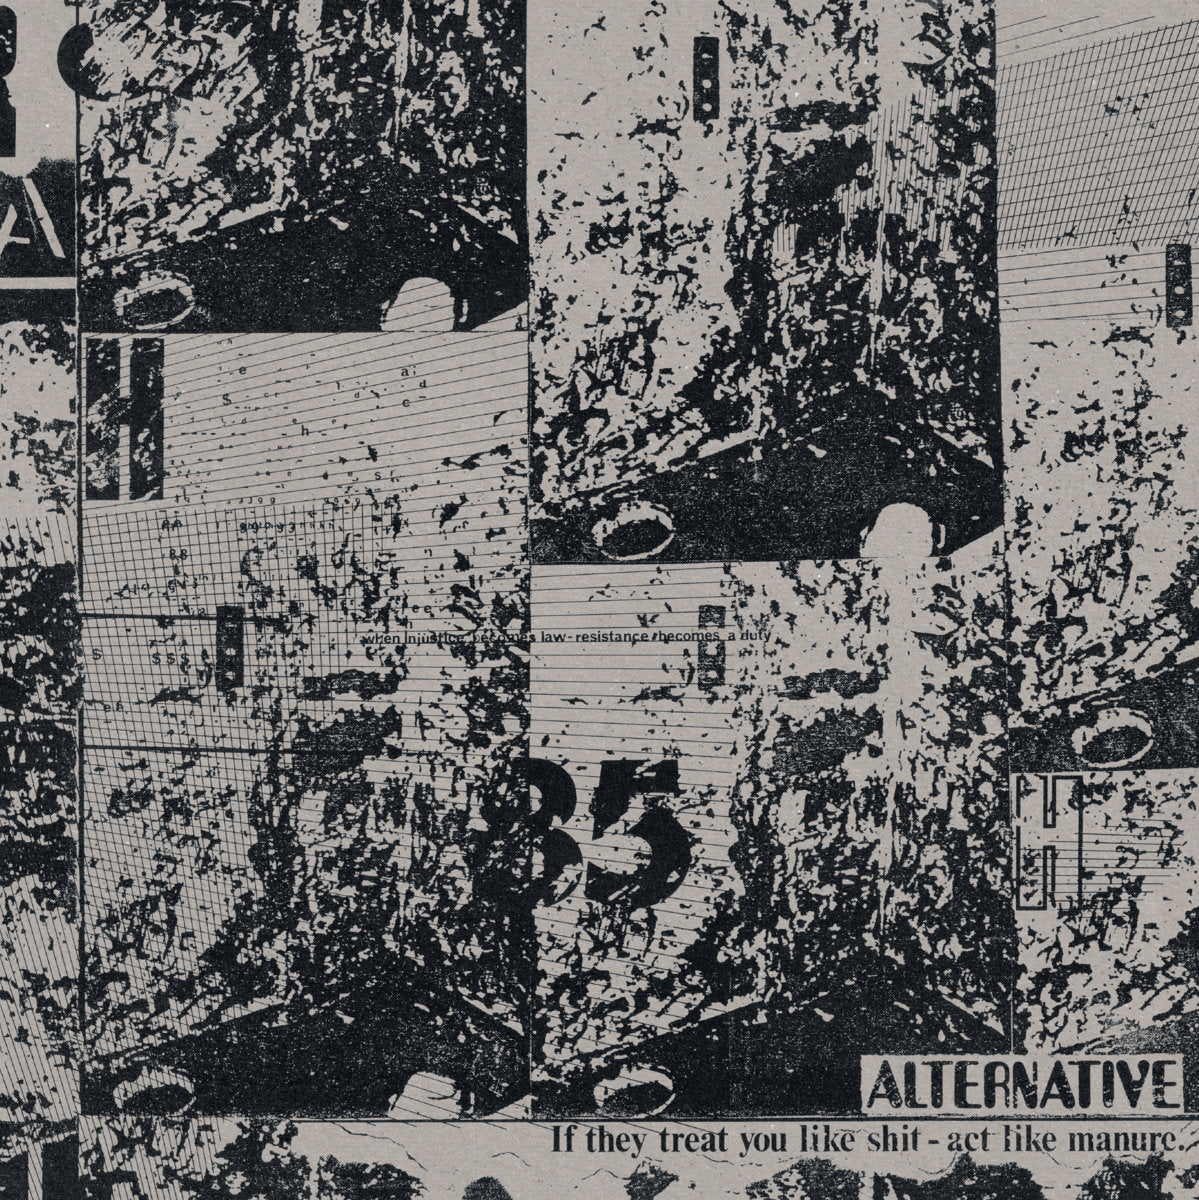 ALTERNATIVE • If They Treat You Like Shit - Act Like Manure • LP